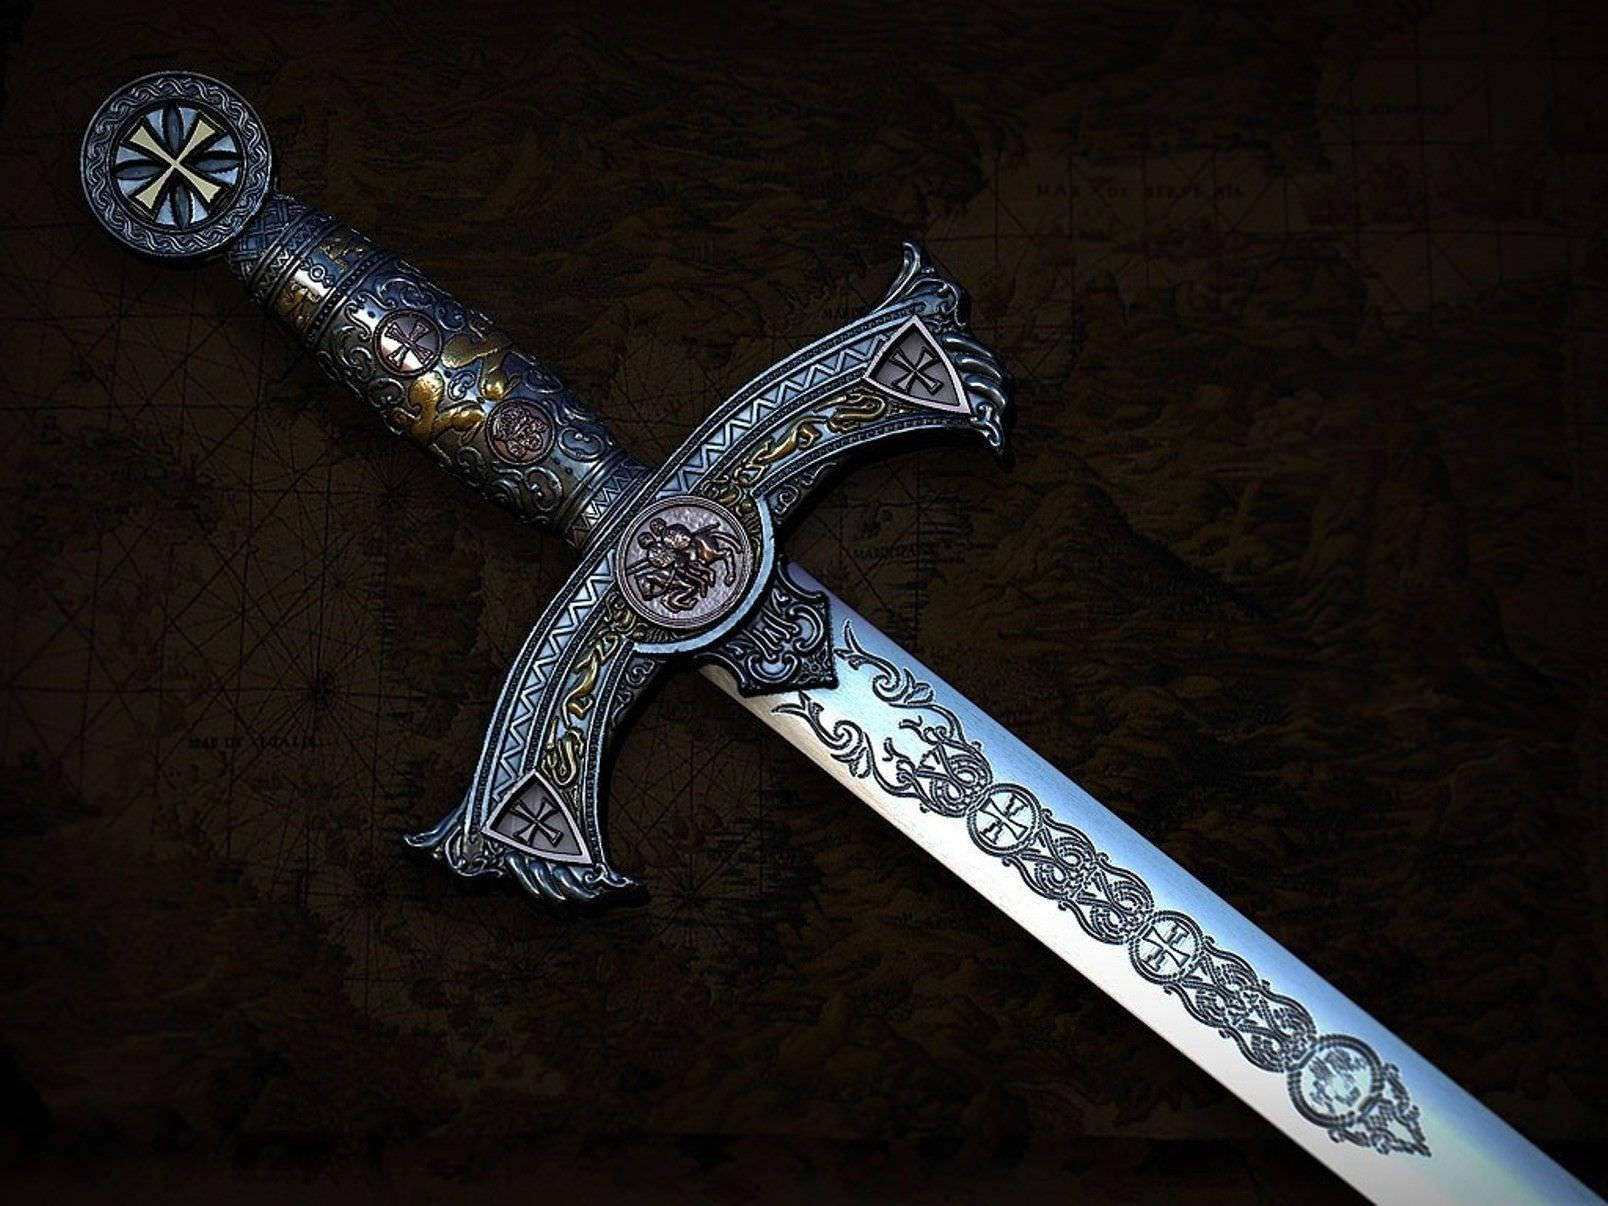 Carvings On Sword Blade And Handle Wallpaper